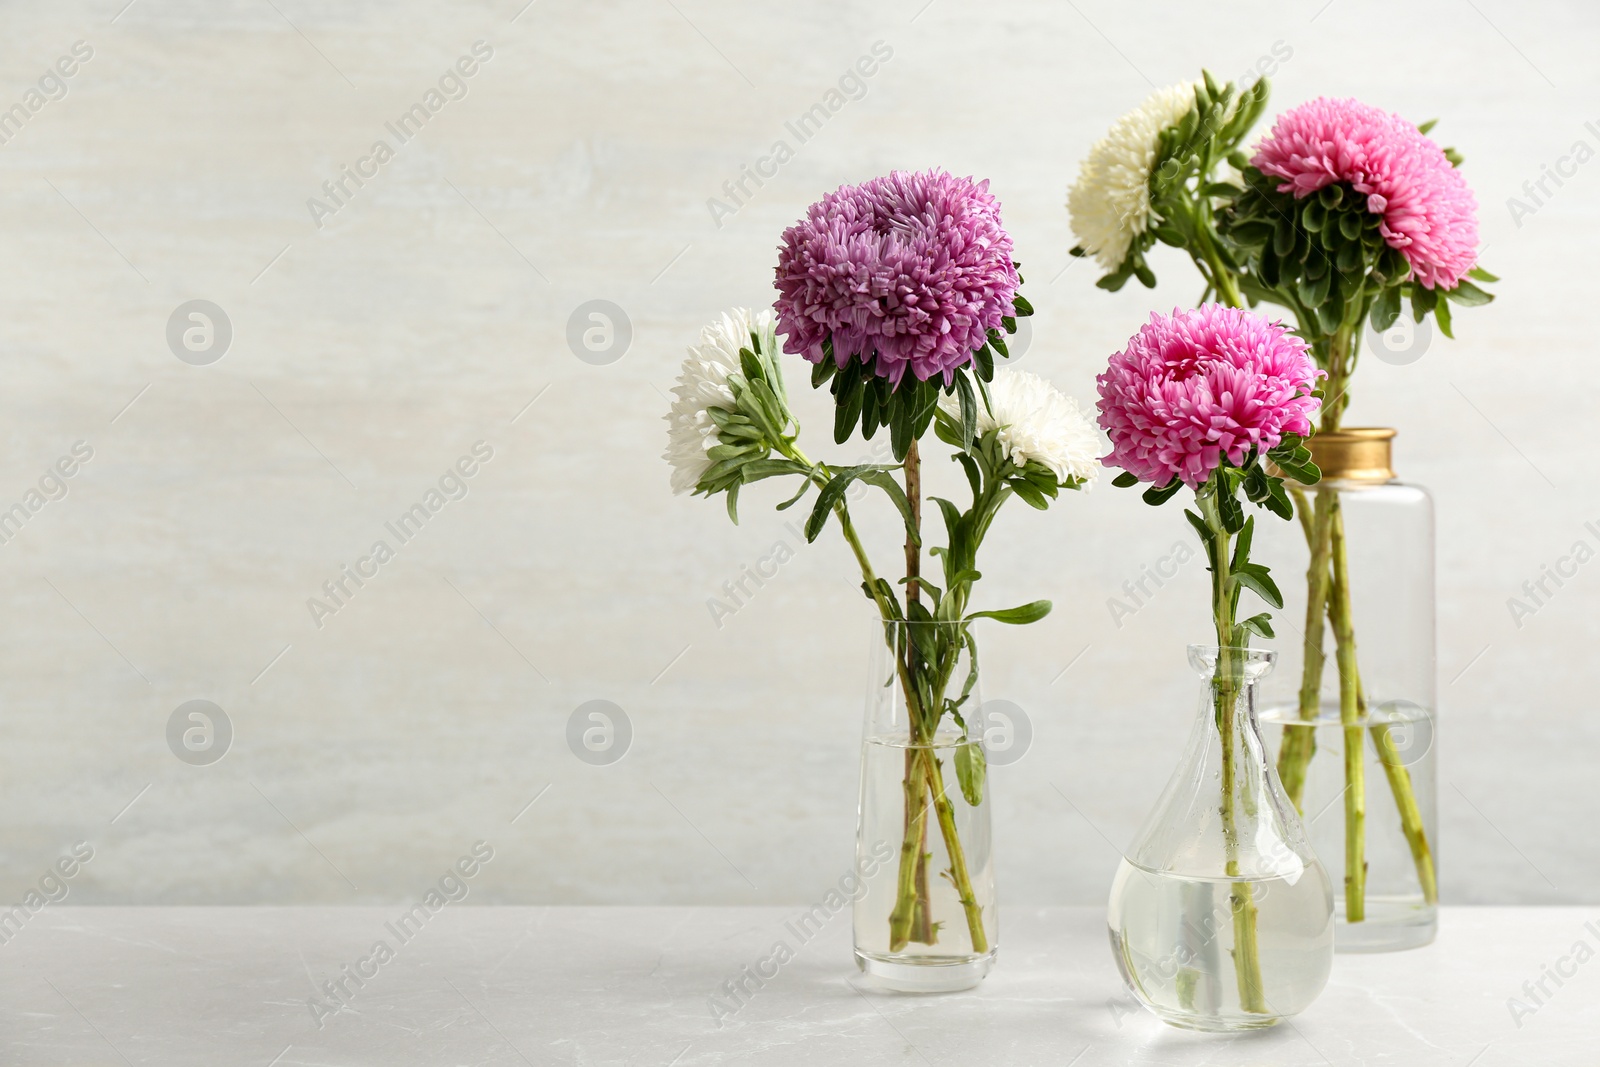 Photo of Beautiful asters in vases on table against white background, space for text. Autumn flowers